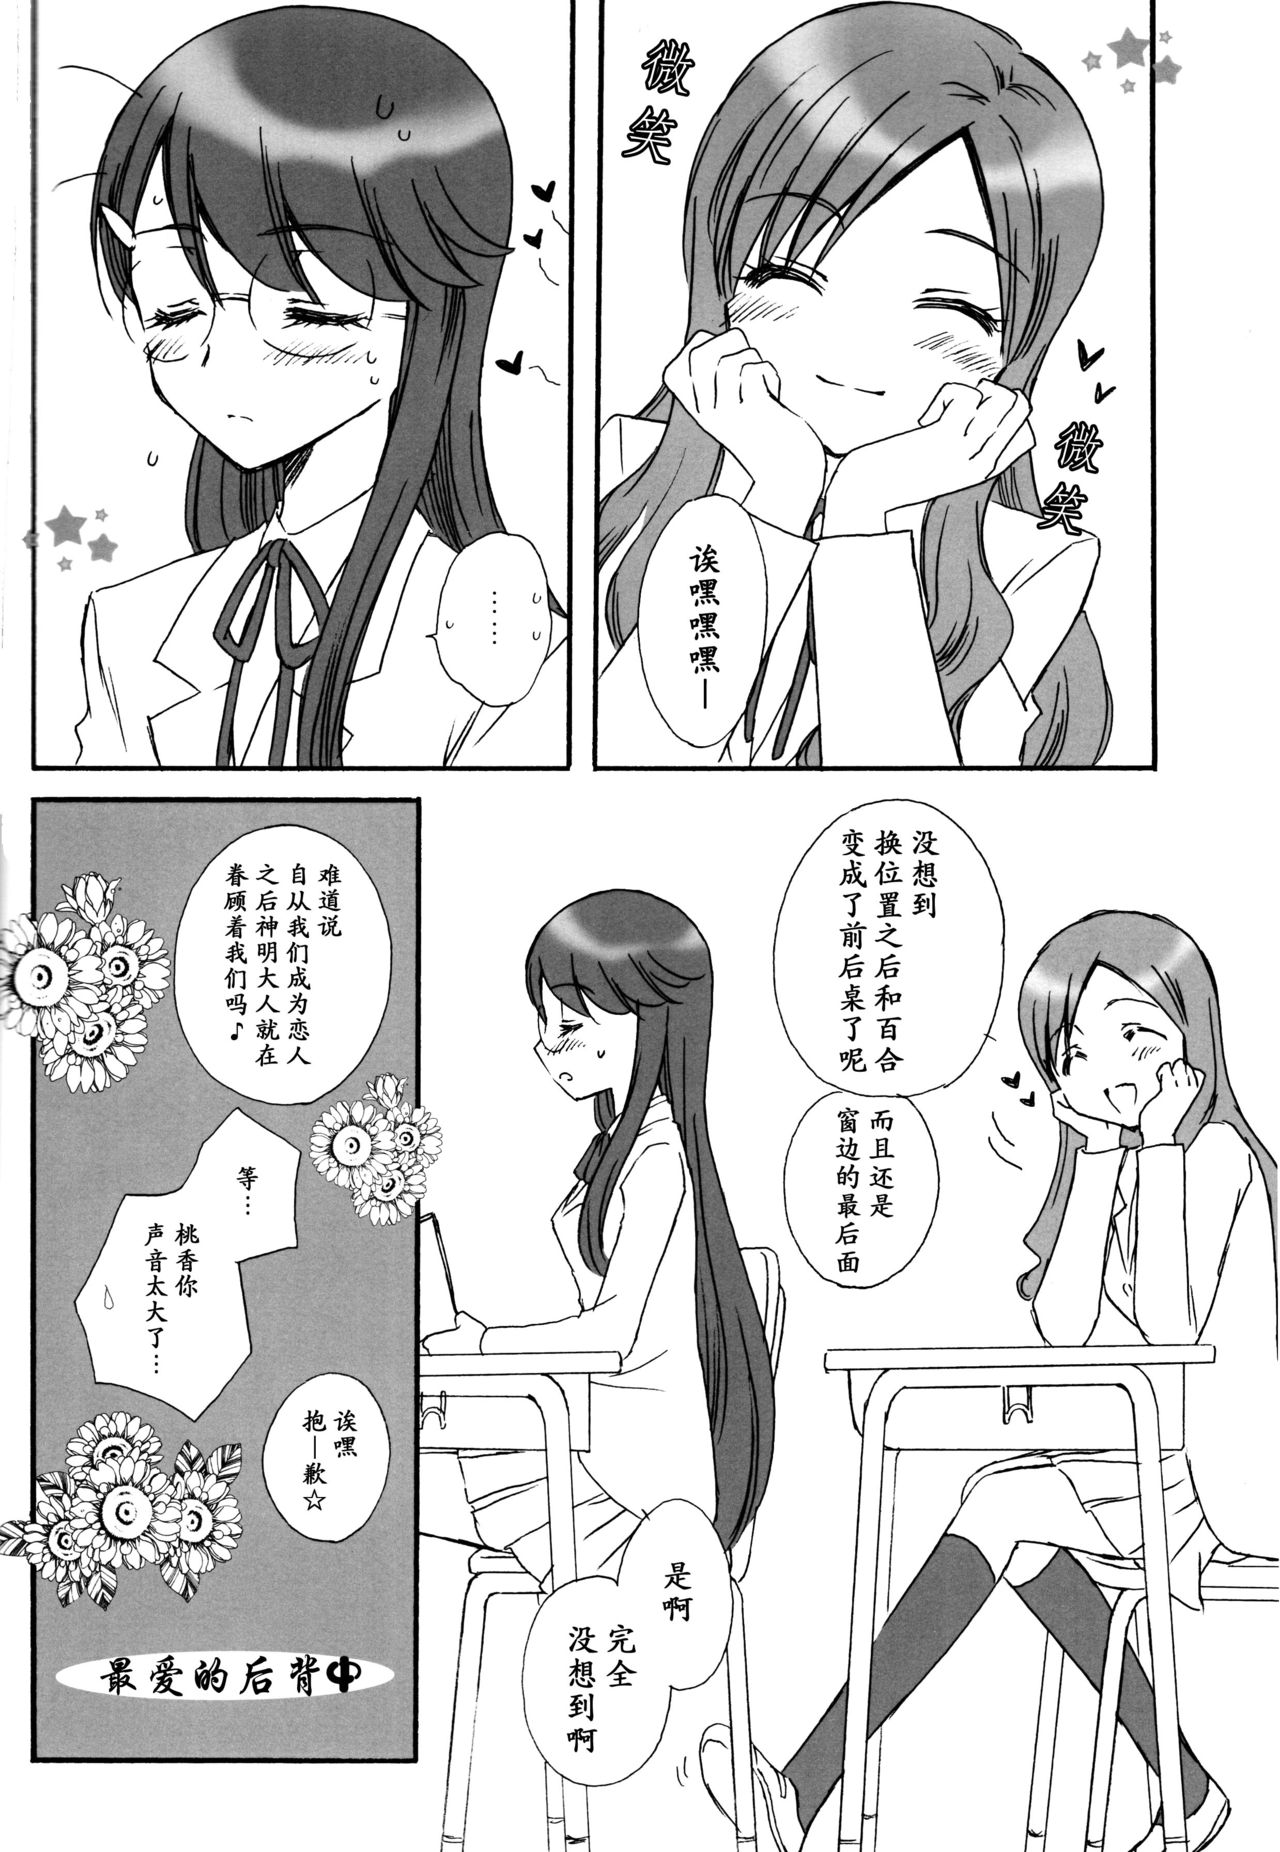 (C81) [Funny Factory (Moomin)] LOVE LOCE LOVE (Heartcatch Precure!) [Chinese] [加帕里汉化组X大友同好会] (C81) [Funny Factory (むーみん)] LOVE LOCE LOVE (ハートキャッチプリキュア!) [中国翻訳]